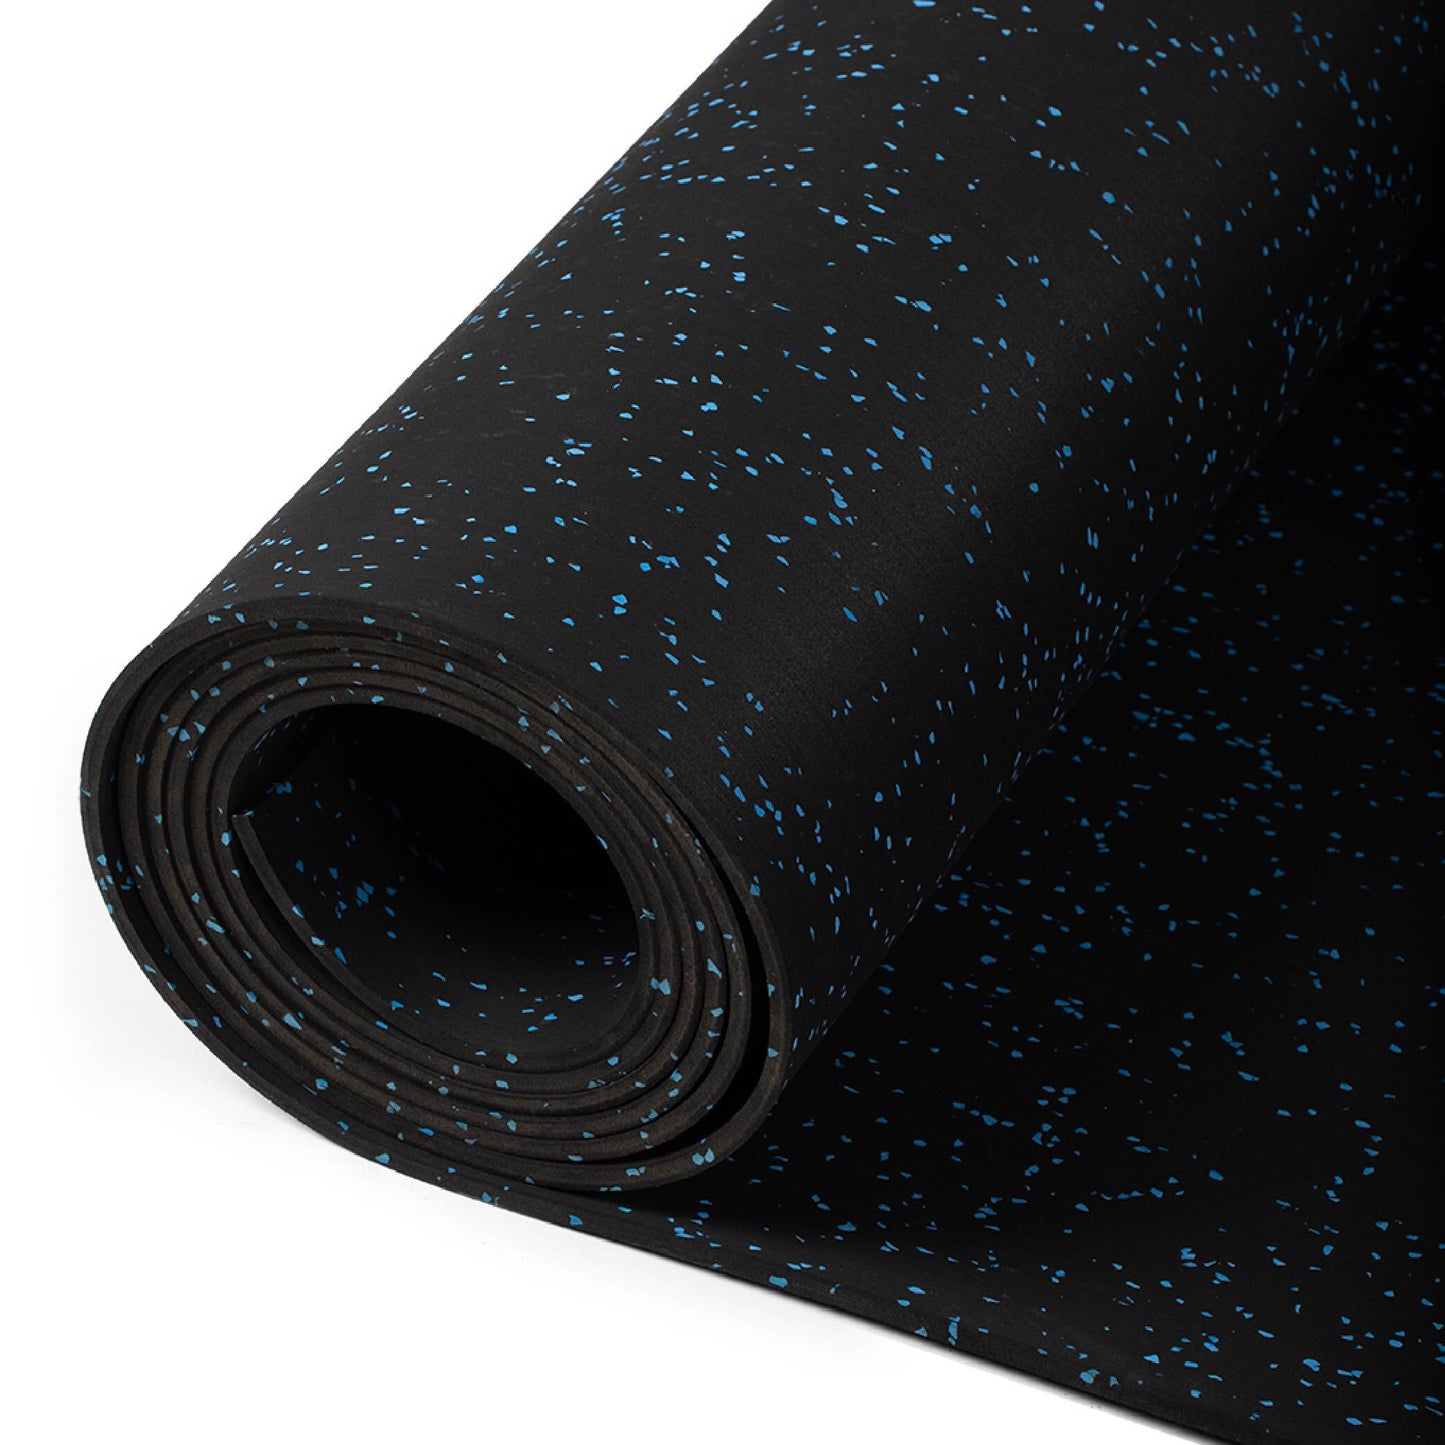 Blue Crumb Rubber Gym Flooring Roll - view 1